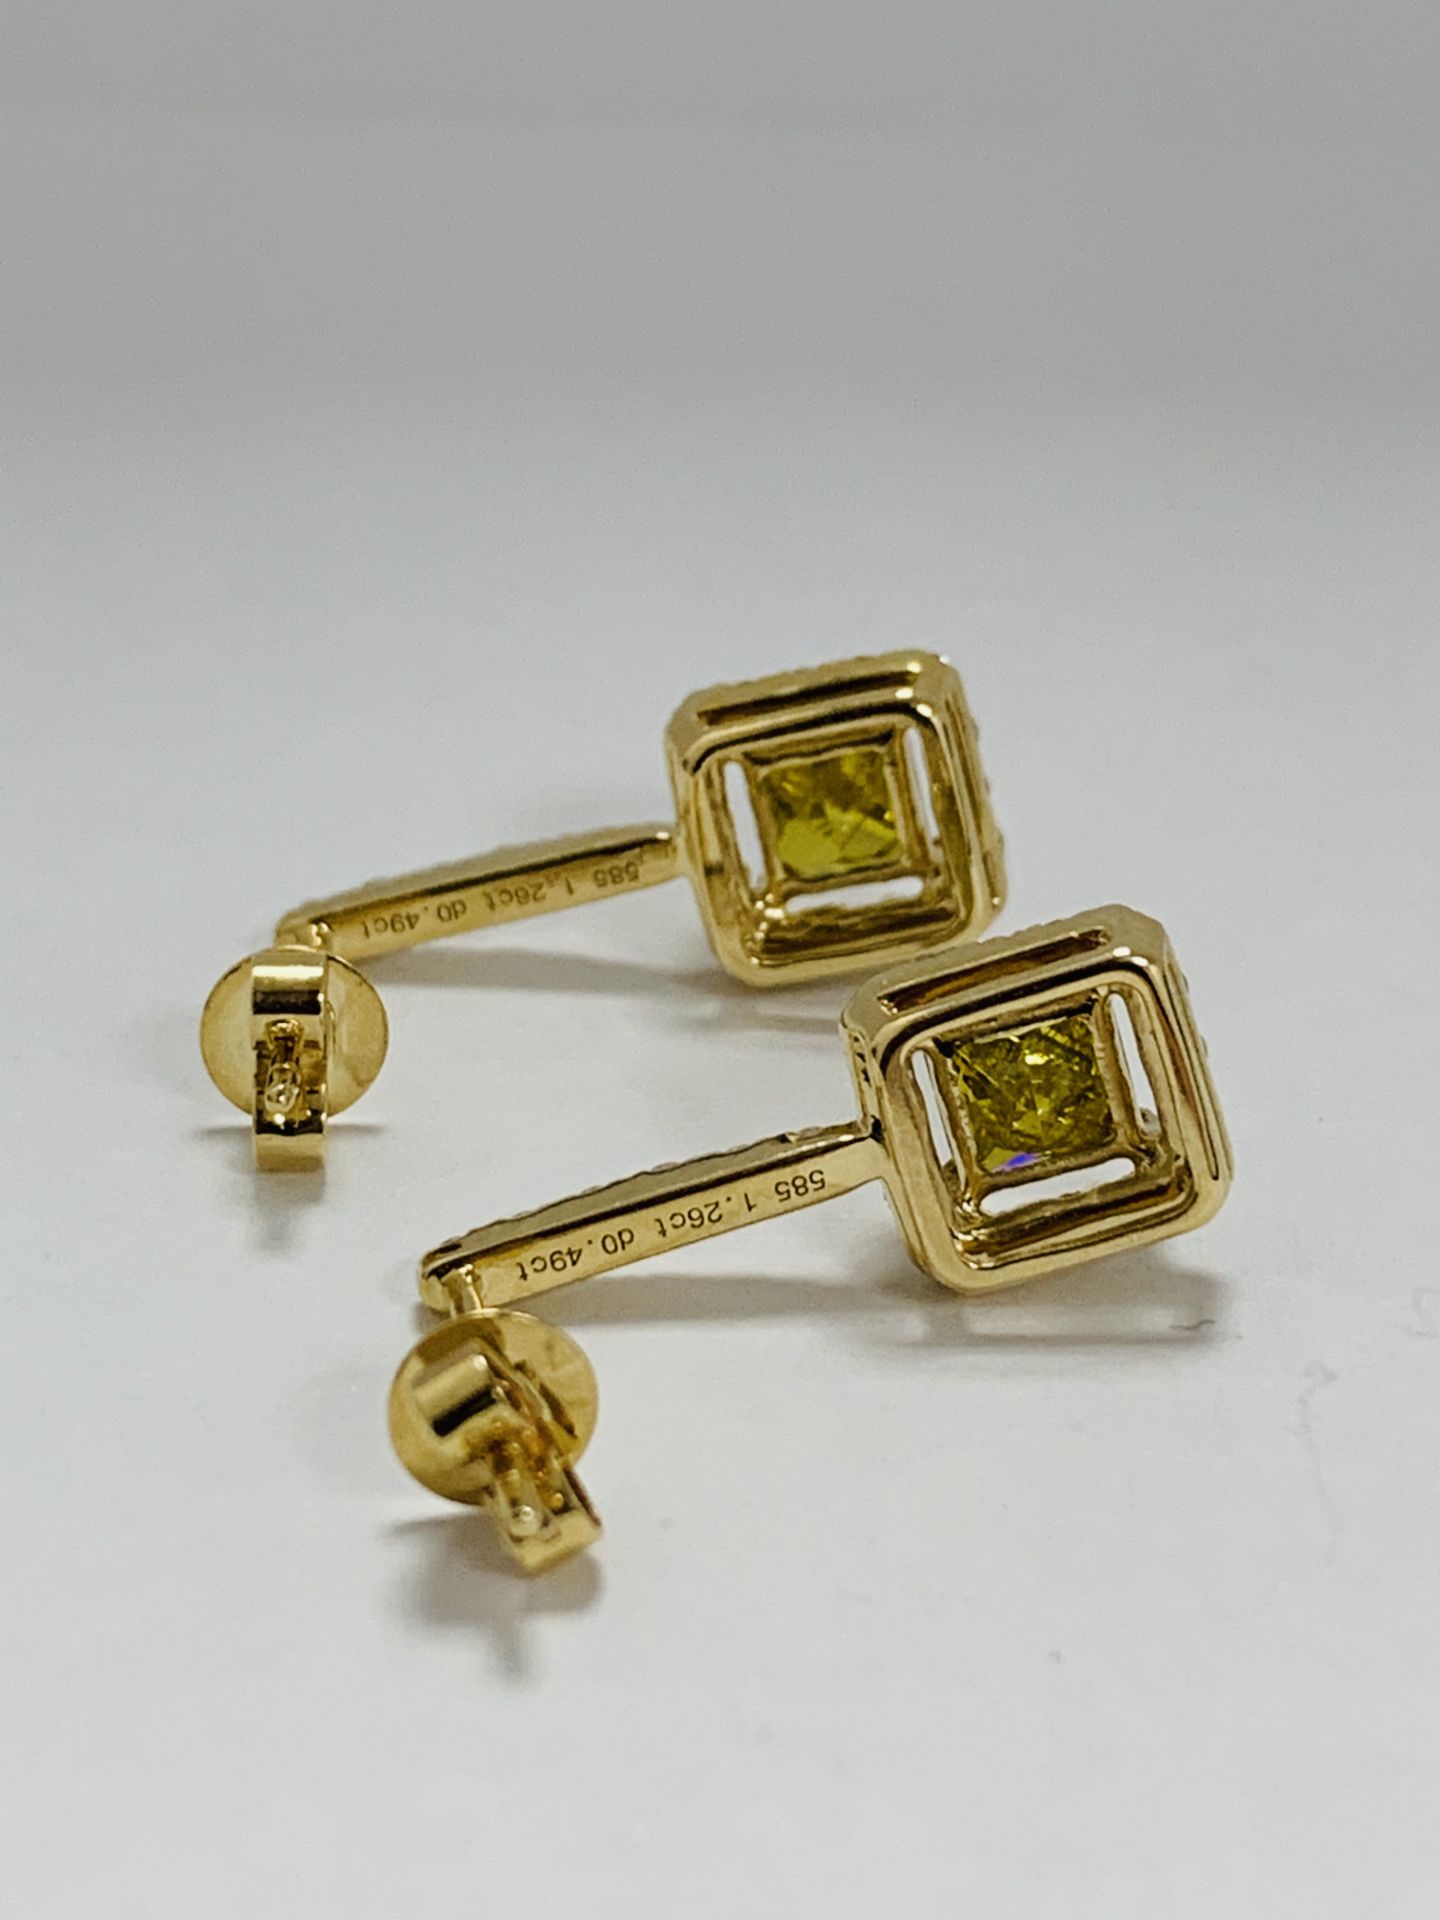 14K Yellow Gold Pair Of Earrings - Image 6 of 9